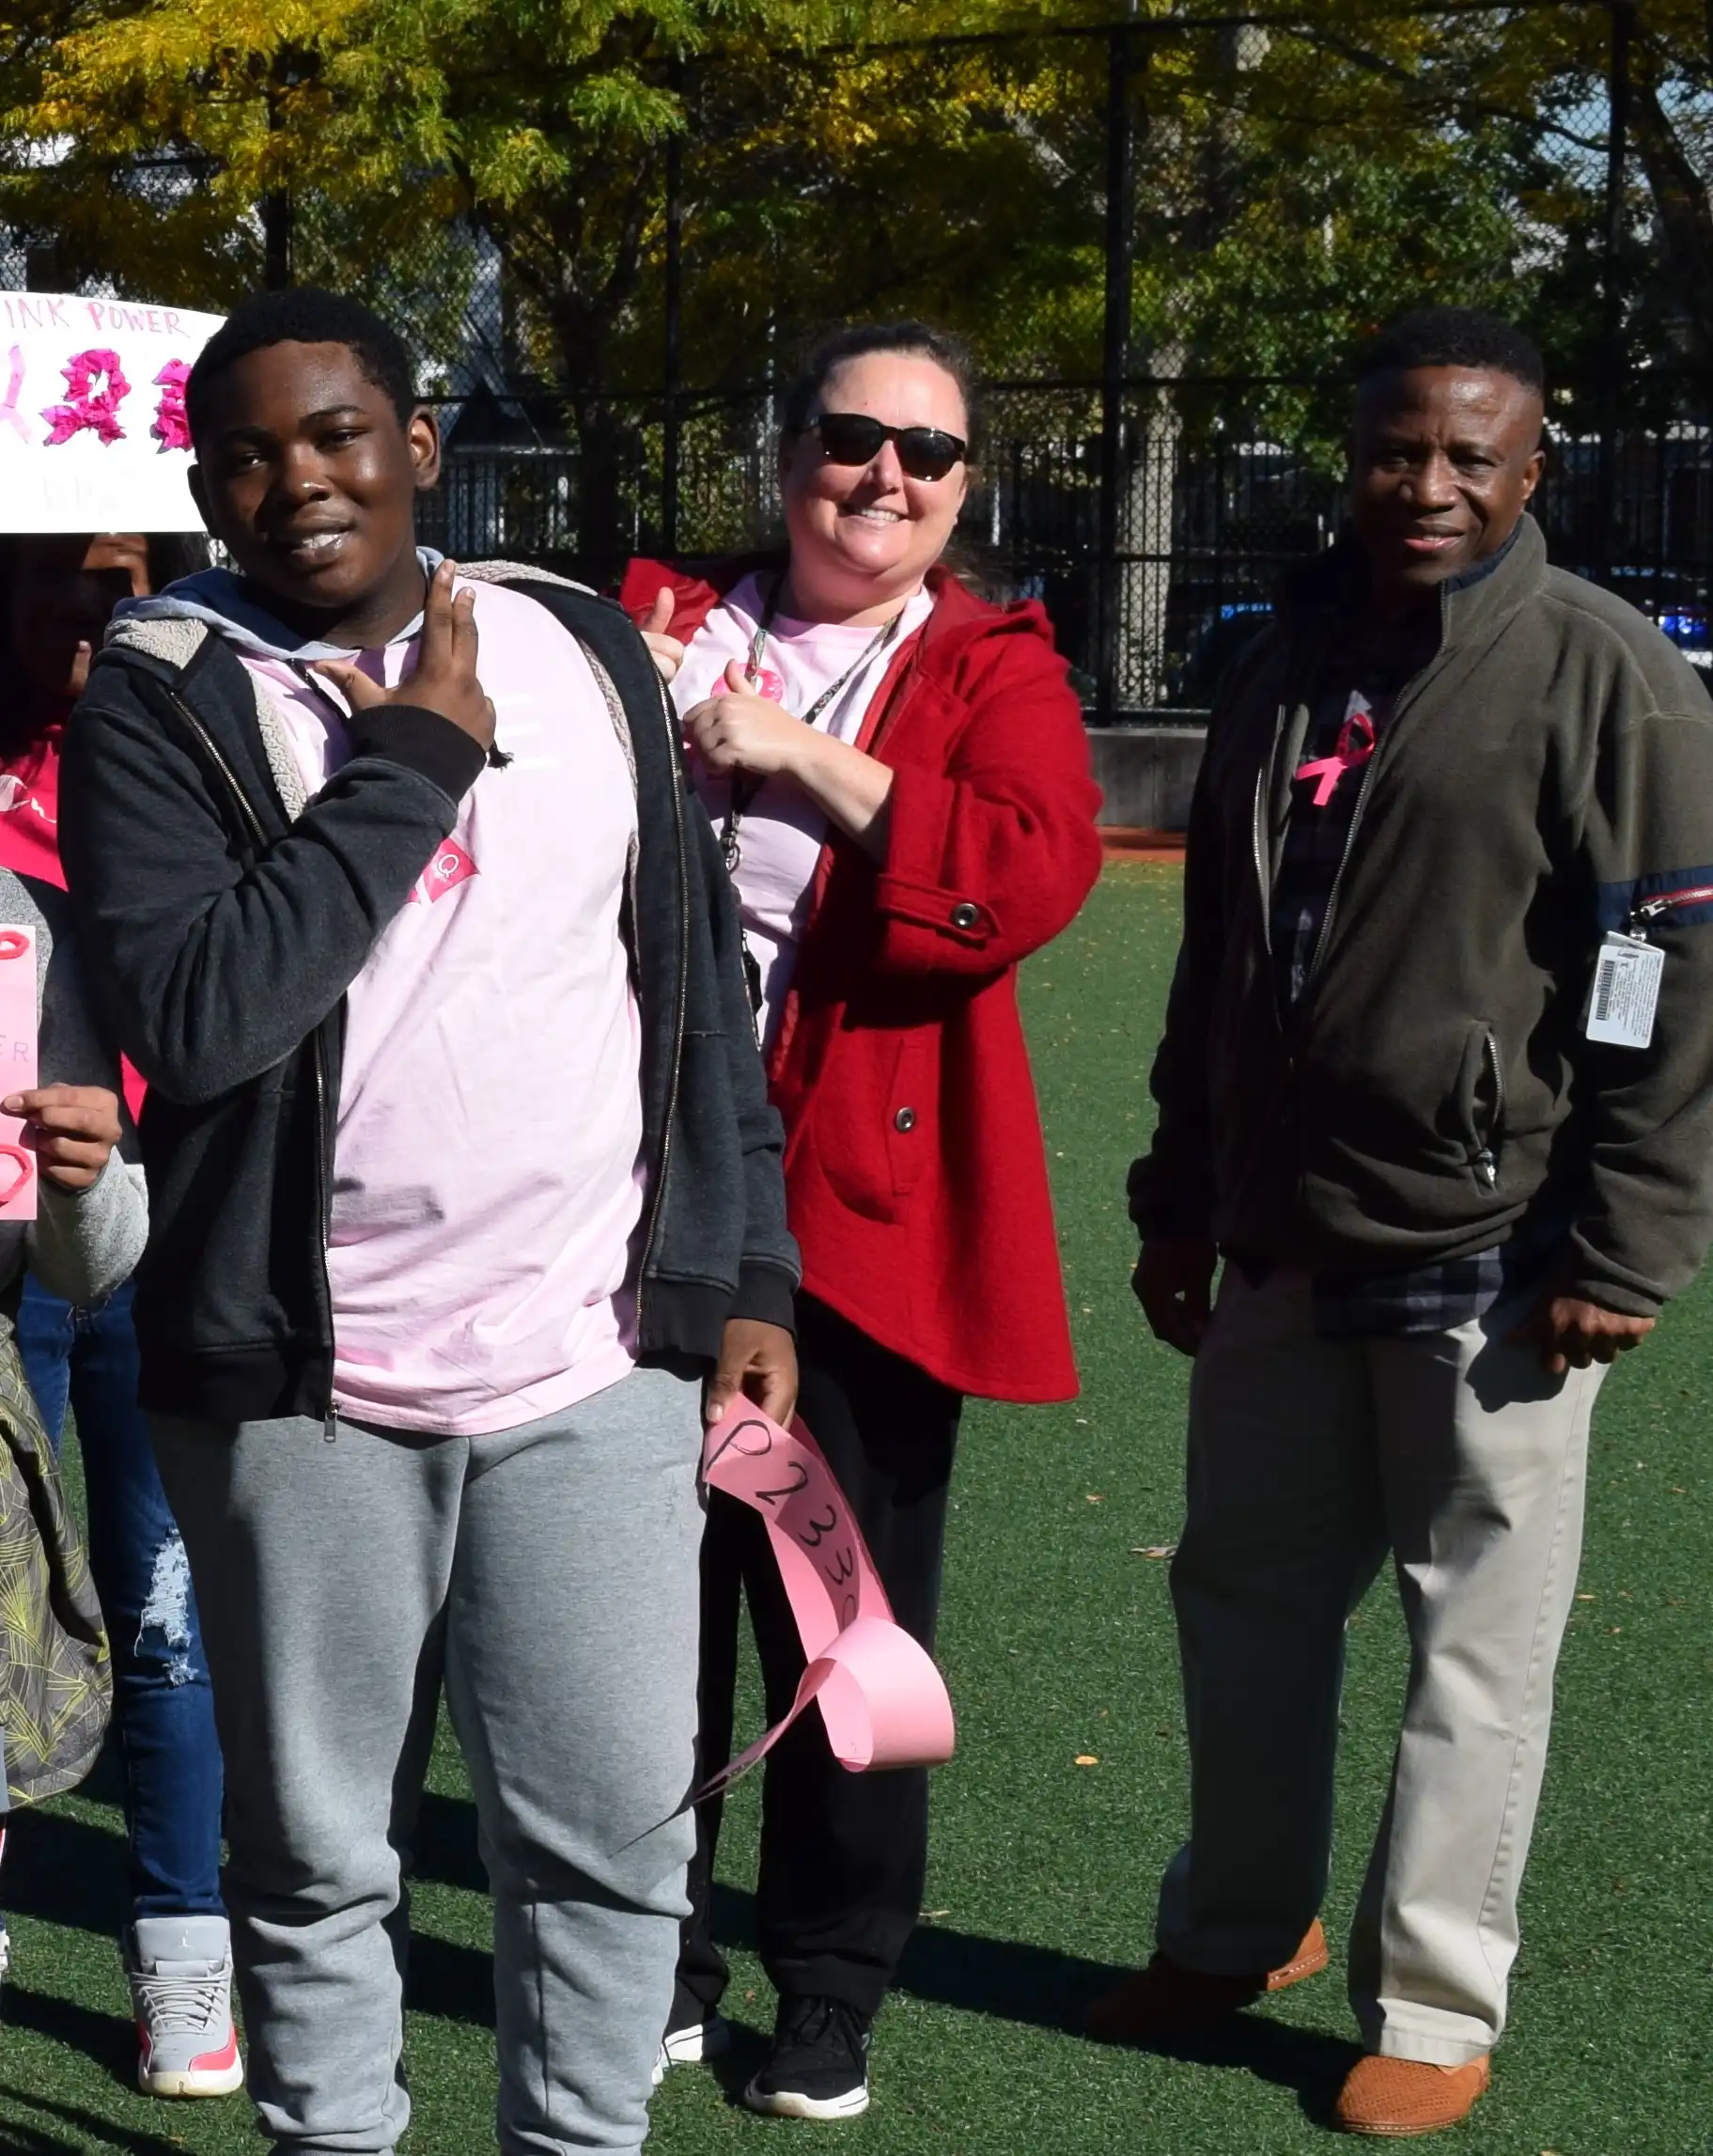 Samuel and his teachers wearing pink during the Breast Cancer Fundraiser Walkathon